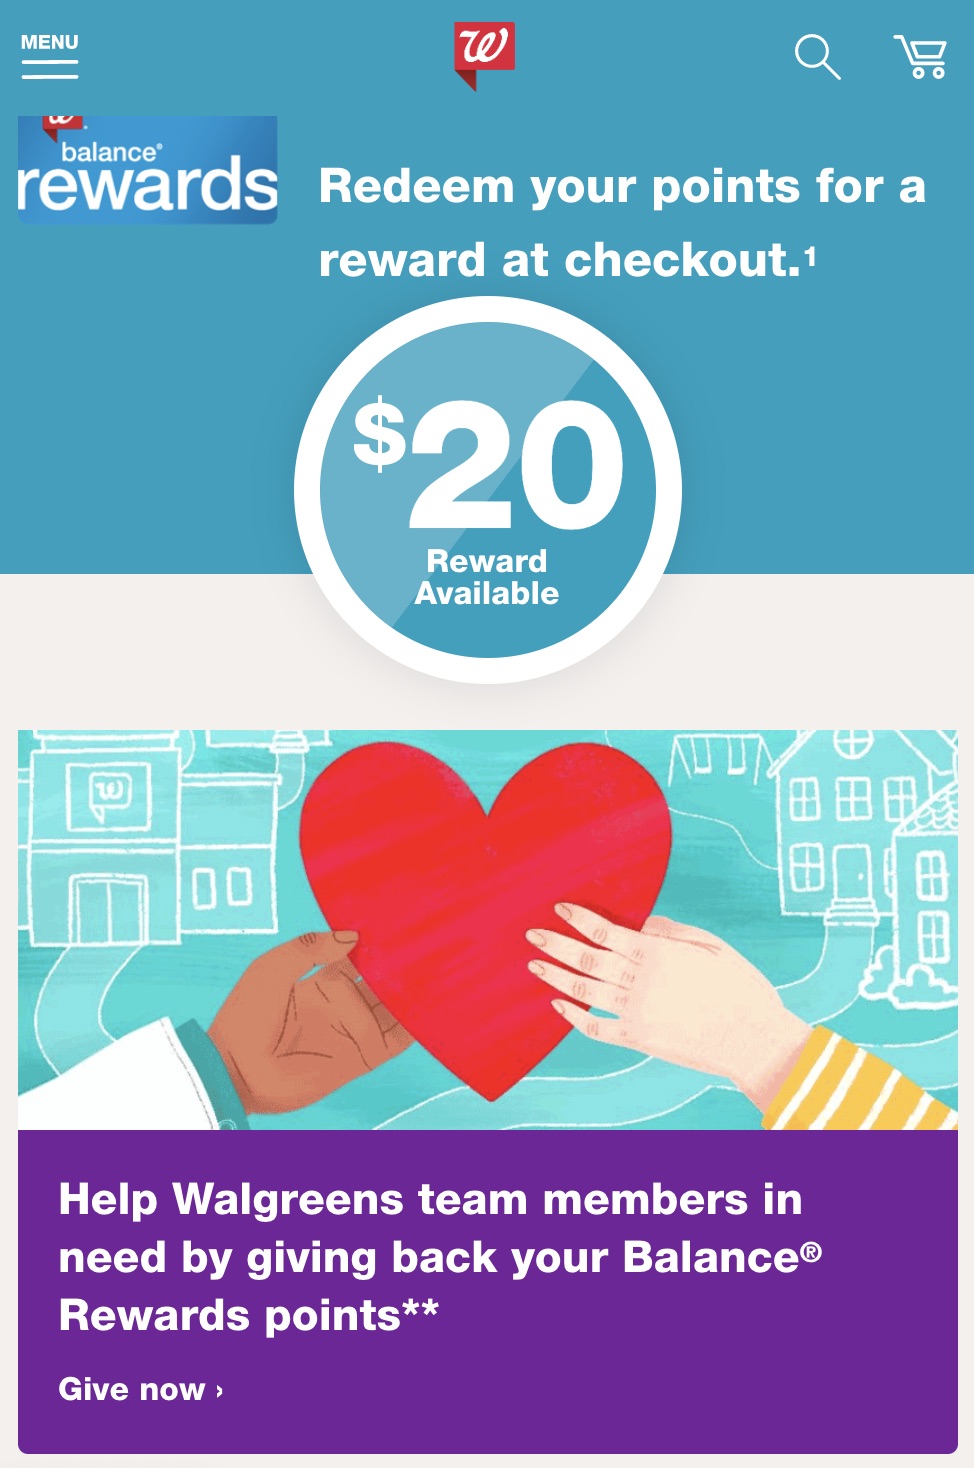 myWalgreens Donation: Simple Giving